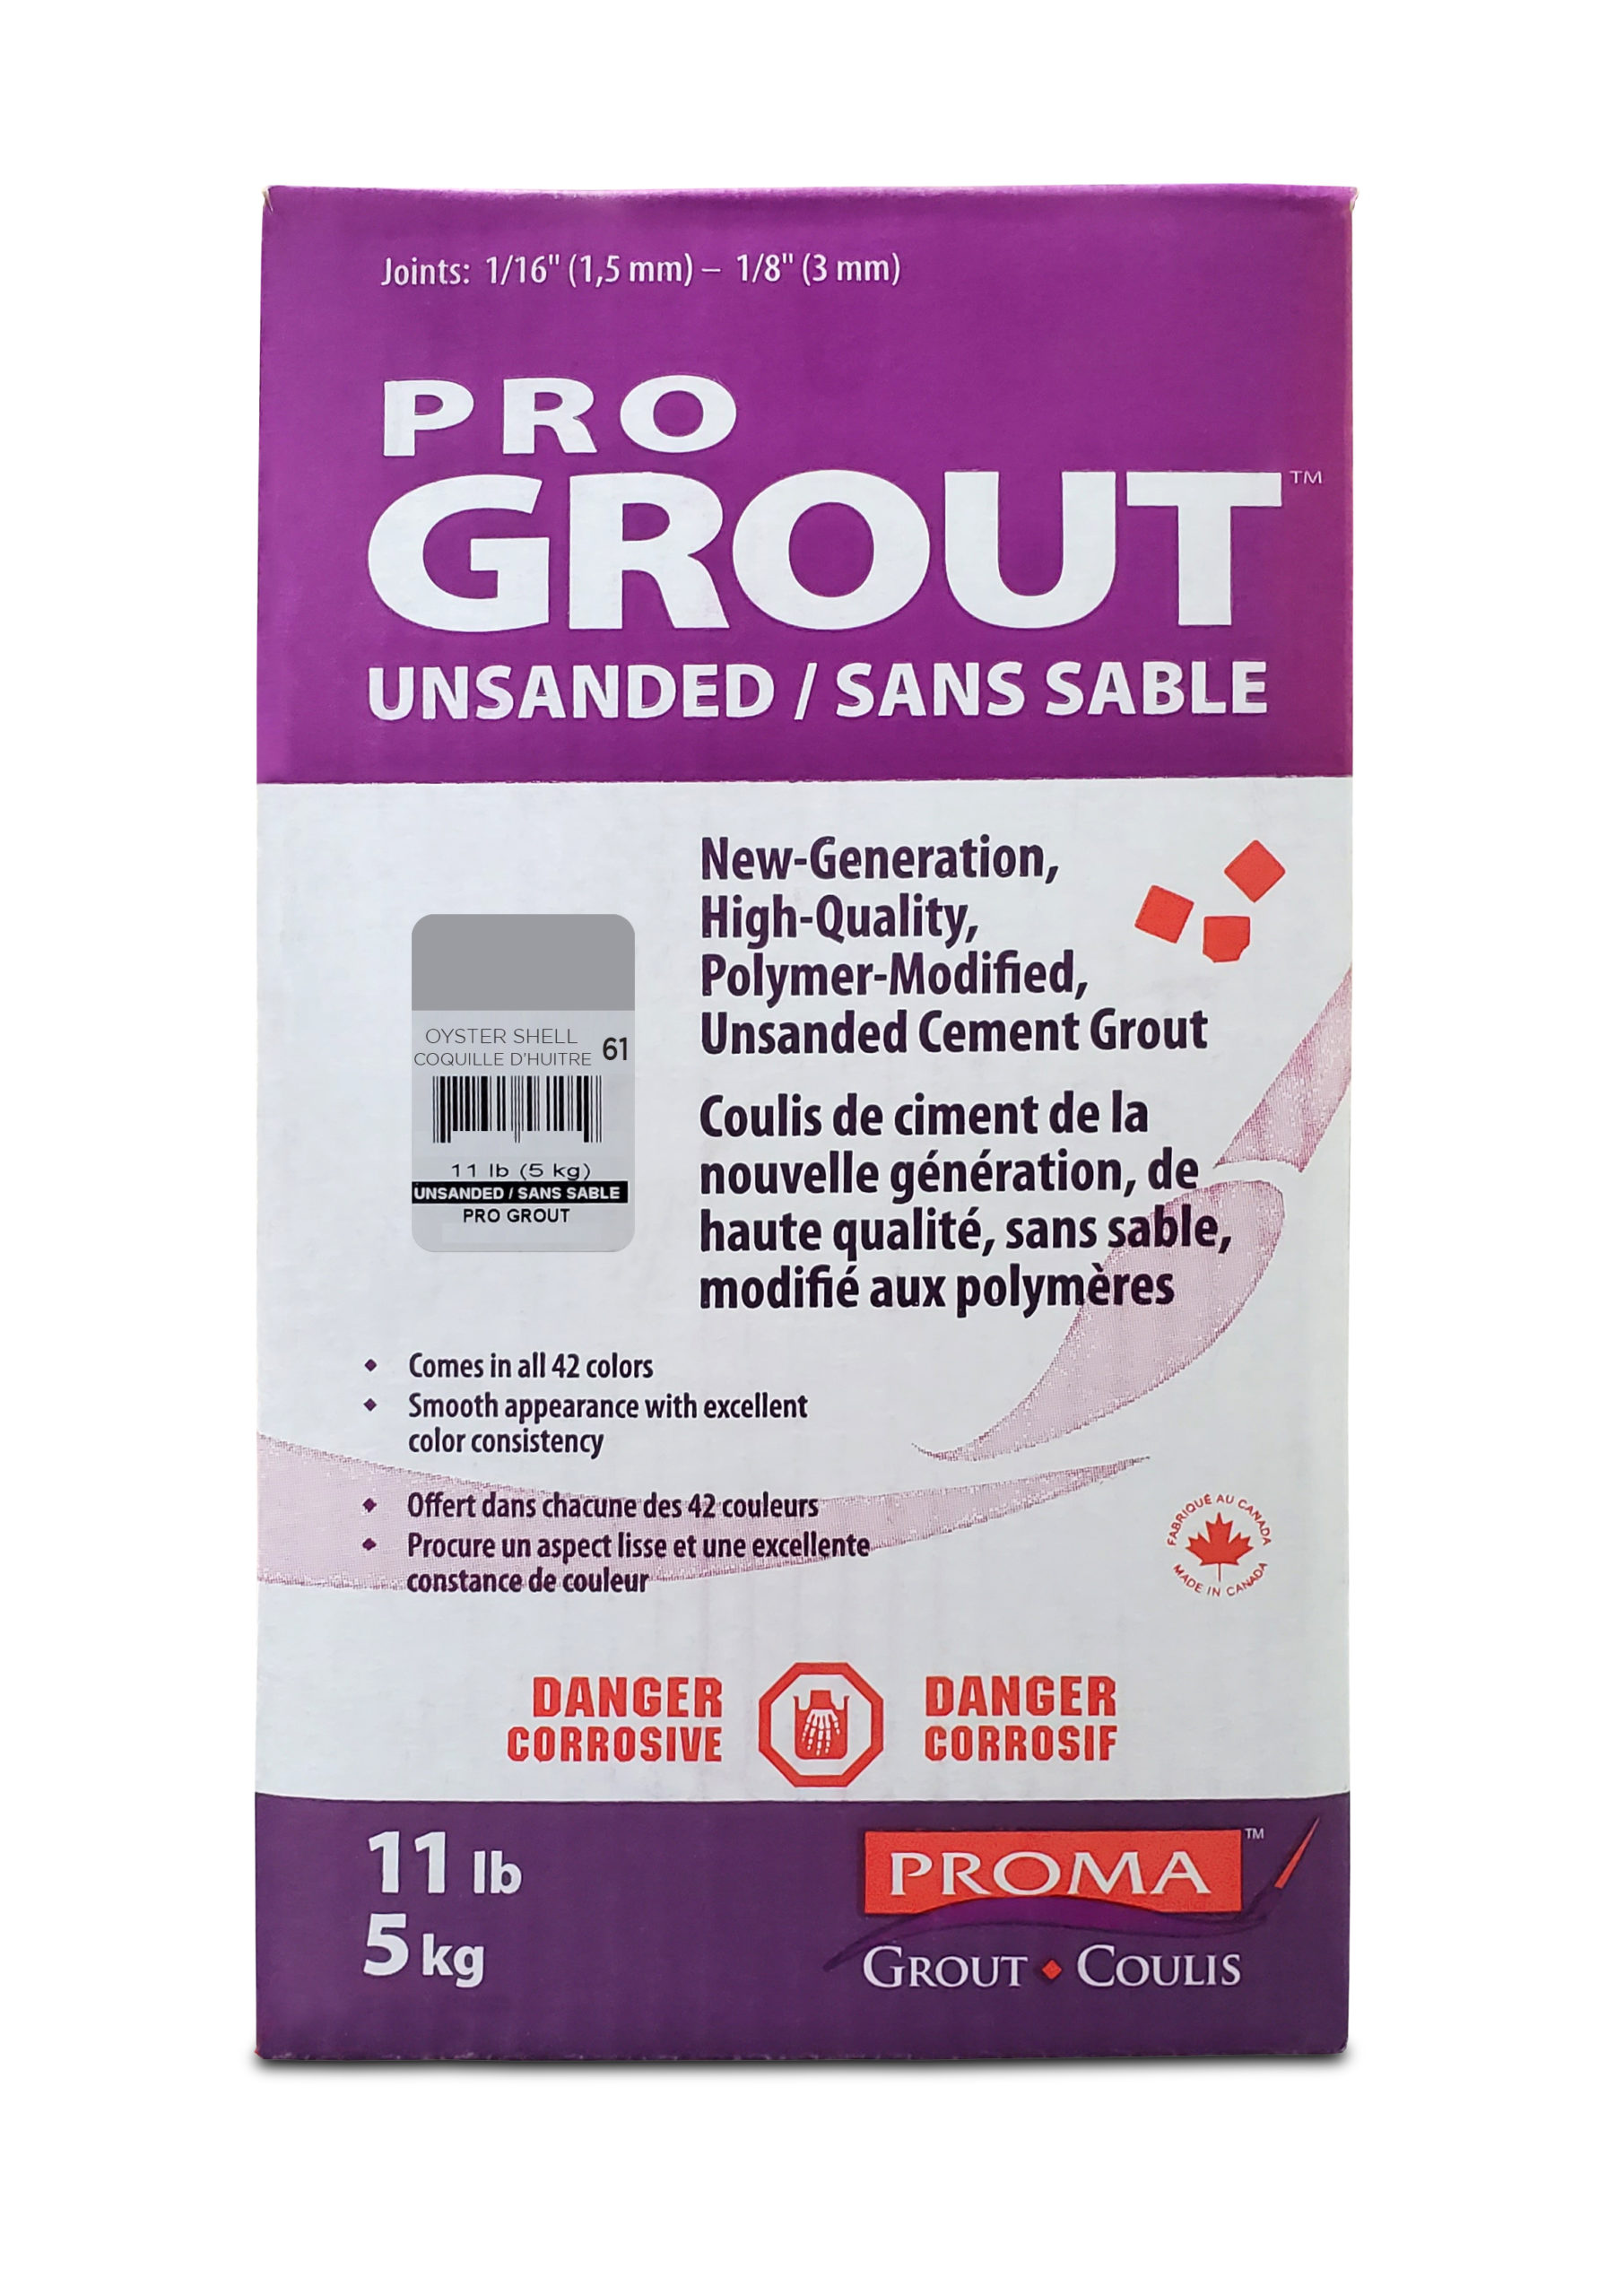 Pro Grout – Unsanded_Oyster Shell_5kg_11lb